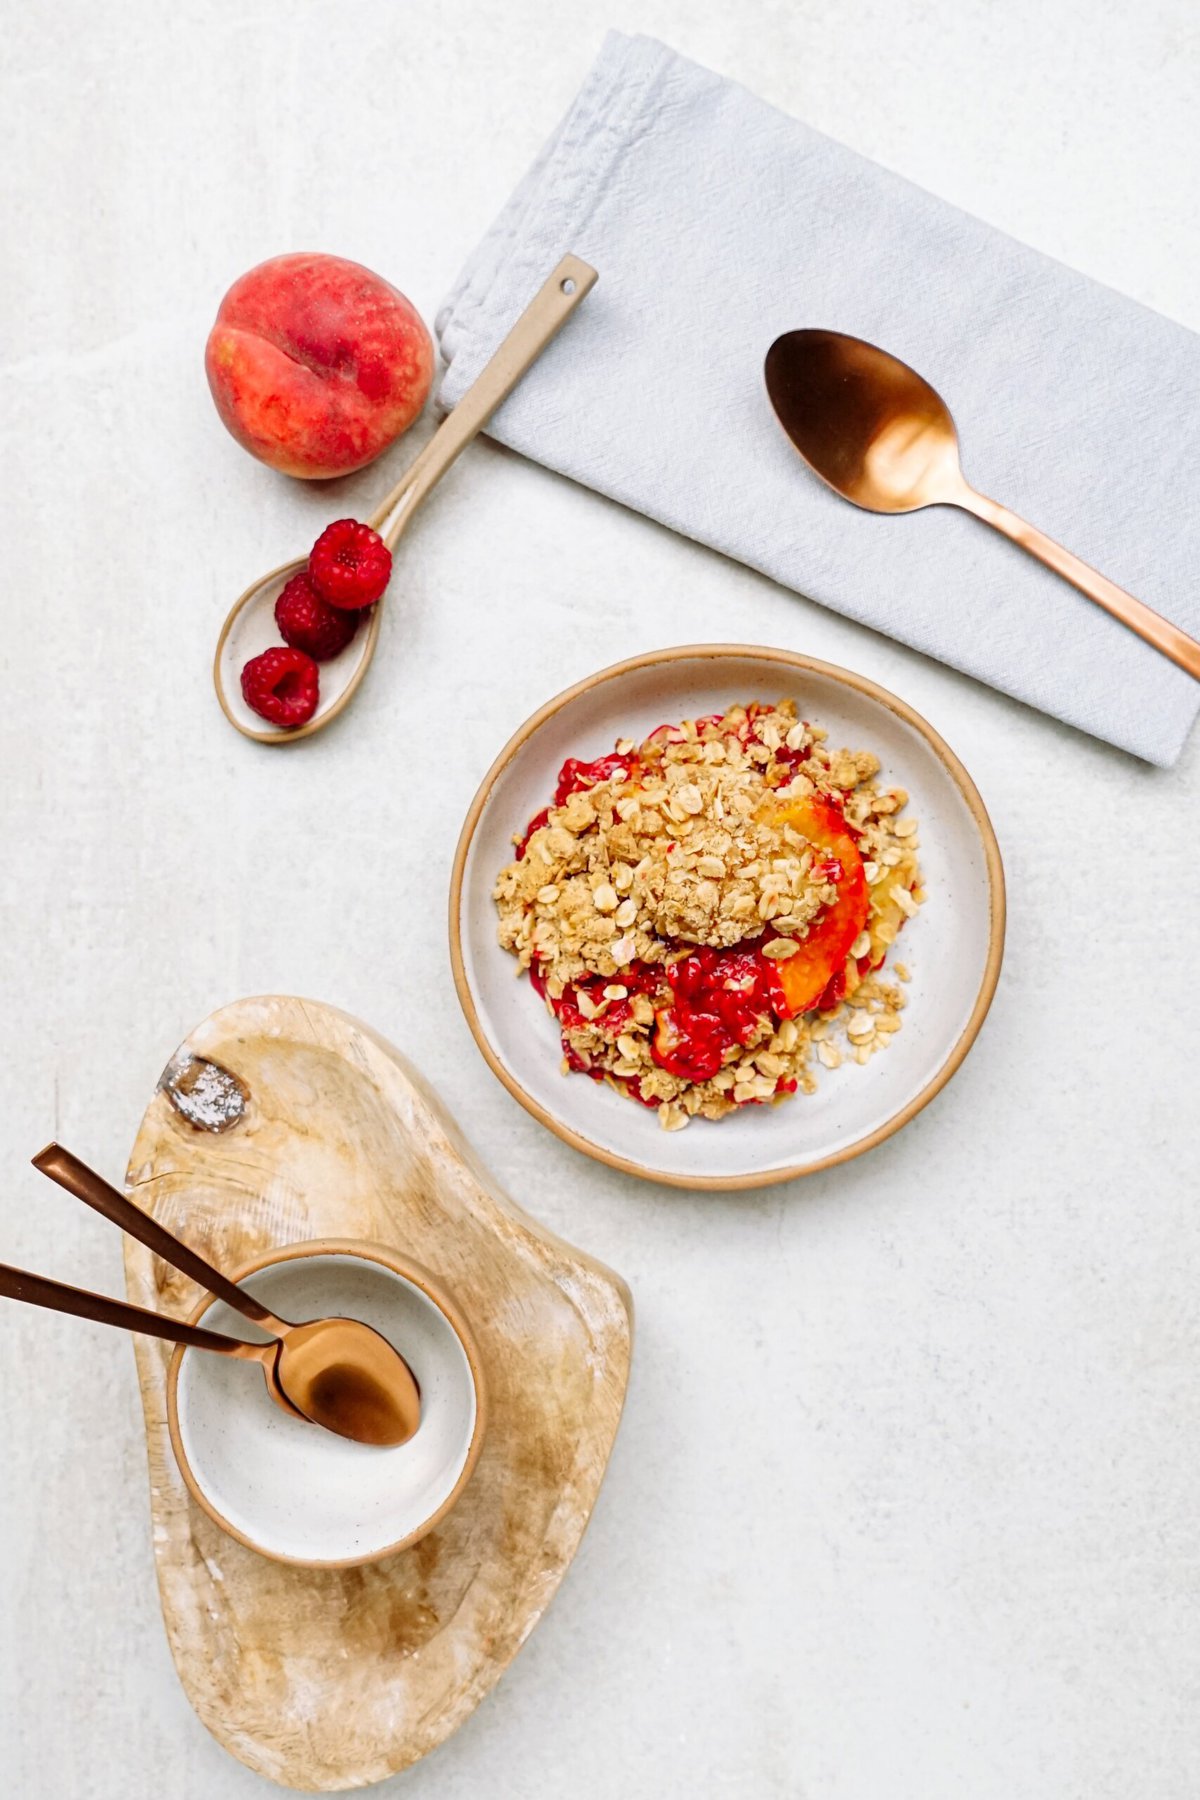 A plate of raspberry cobbler next to a spoon, fresh peach, and raspberries. A wooden tray holds a bowl and spoons. A folded napkin with a spoon is placed nearby on a light surface.